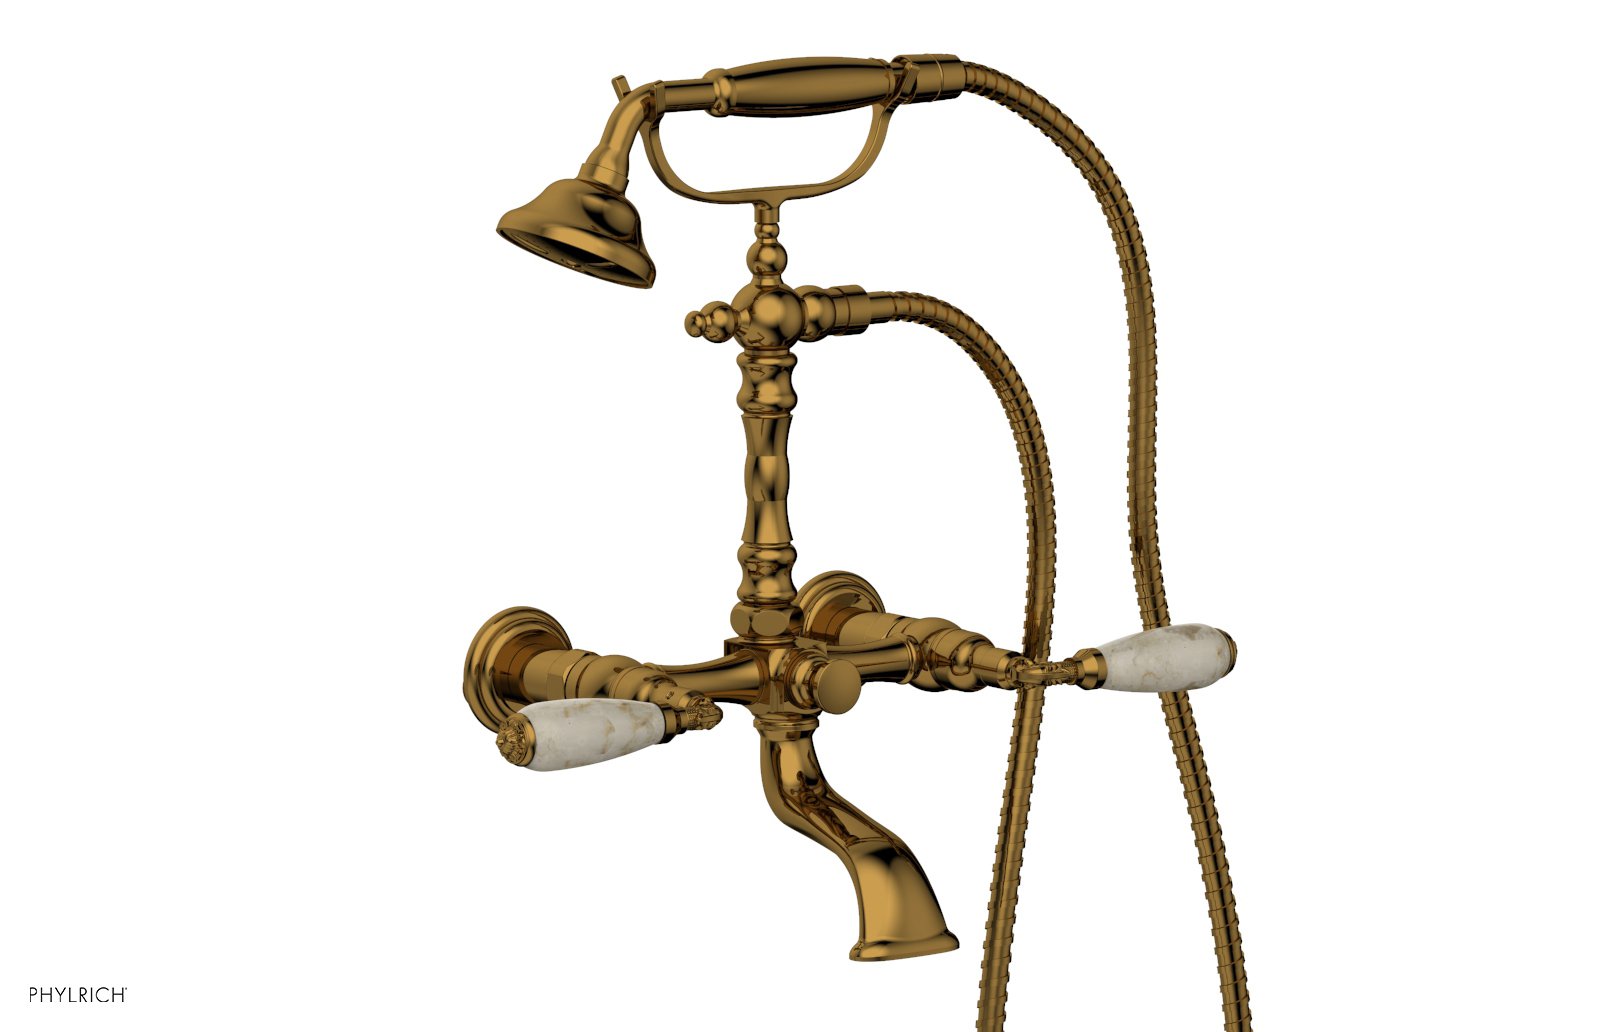 Phylrich VALENCIA Exposed Tub & Hand Shower - Beige Marble Lever Handle